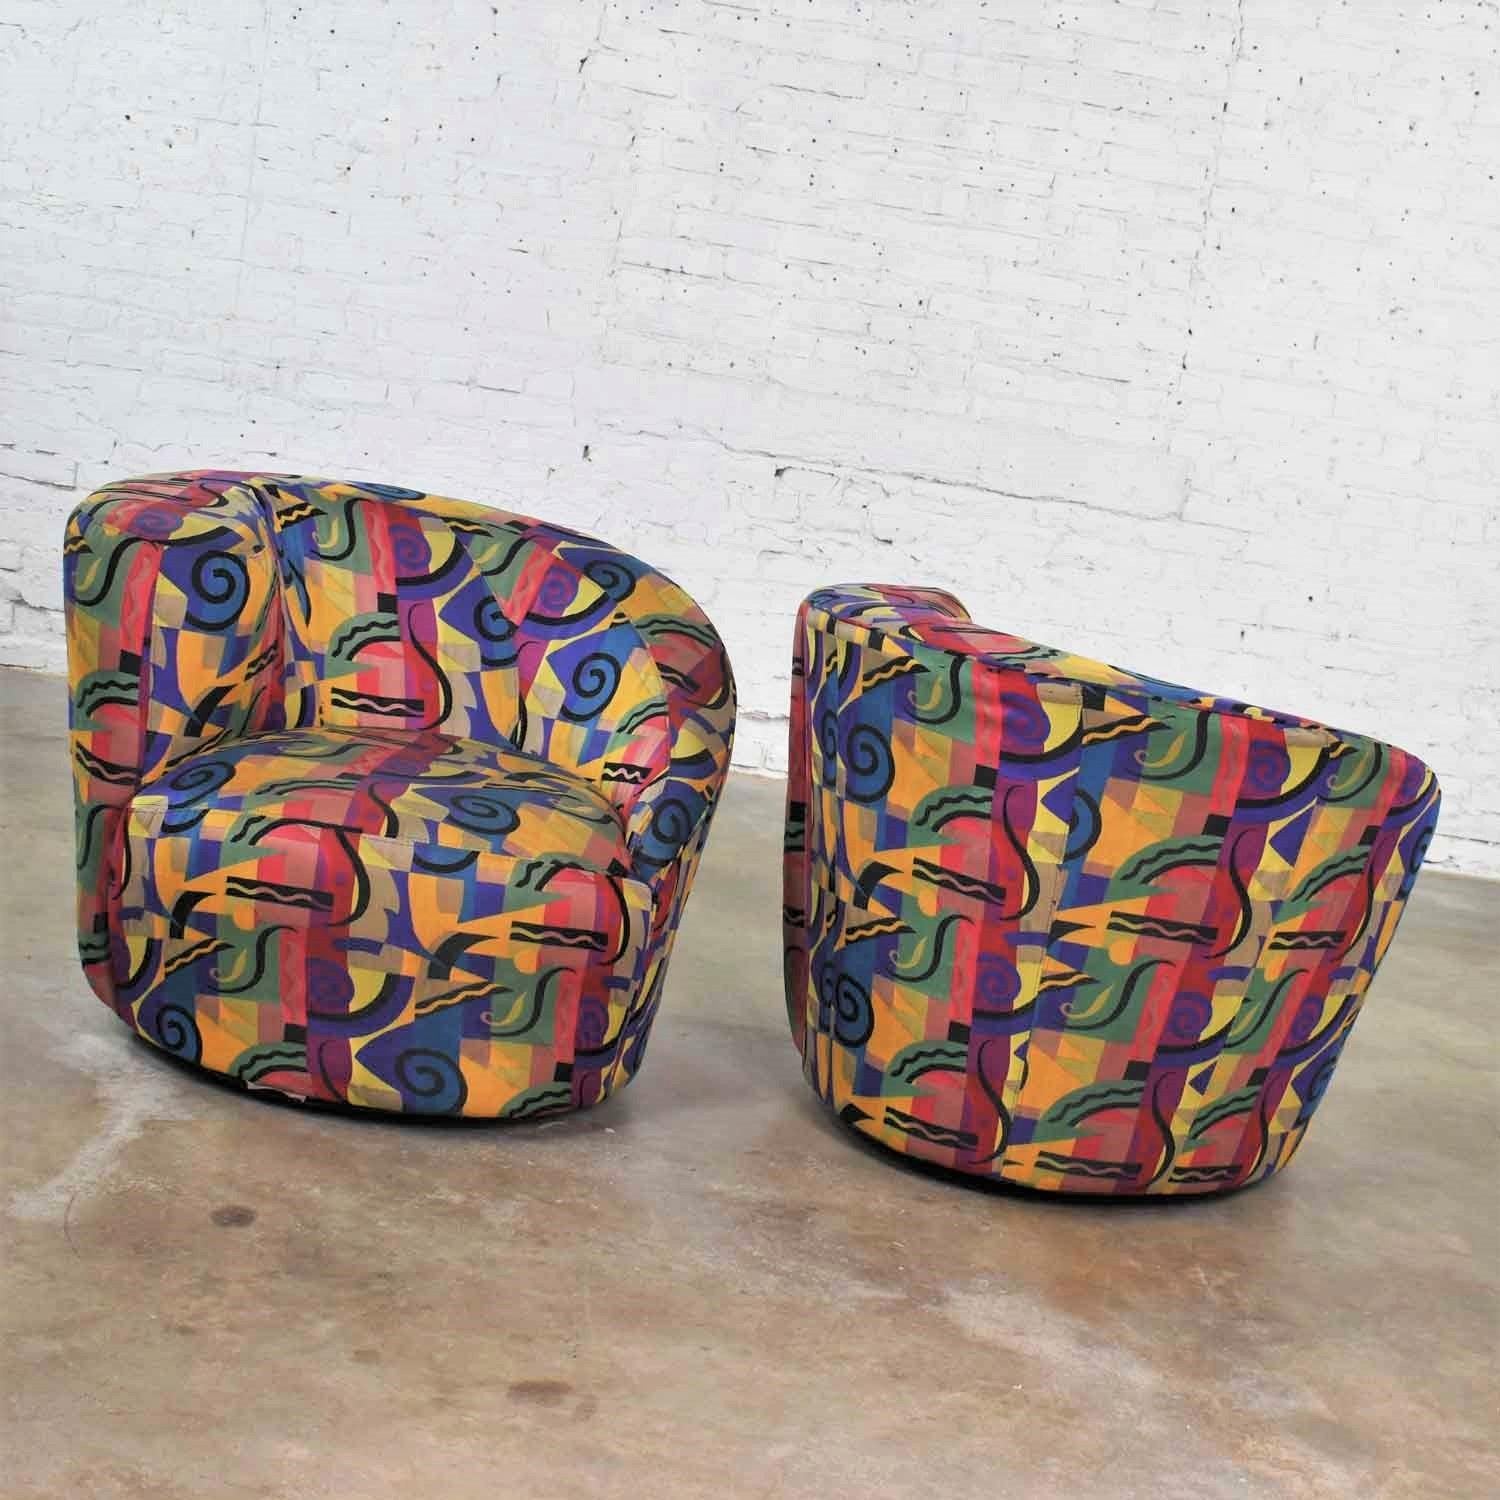 Handsome pair of asymmetric swivel chairs in the style of the Nautilus chair. But this pair is made by Sam Moore Furniture a La-Z-Boy company. They are in wonderful vintage condition and have been professionally cleaned. However, there are some